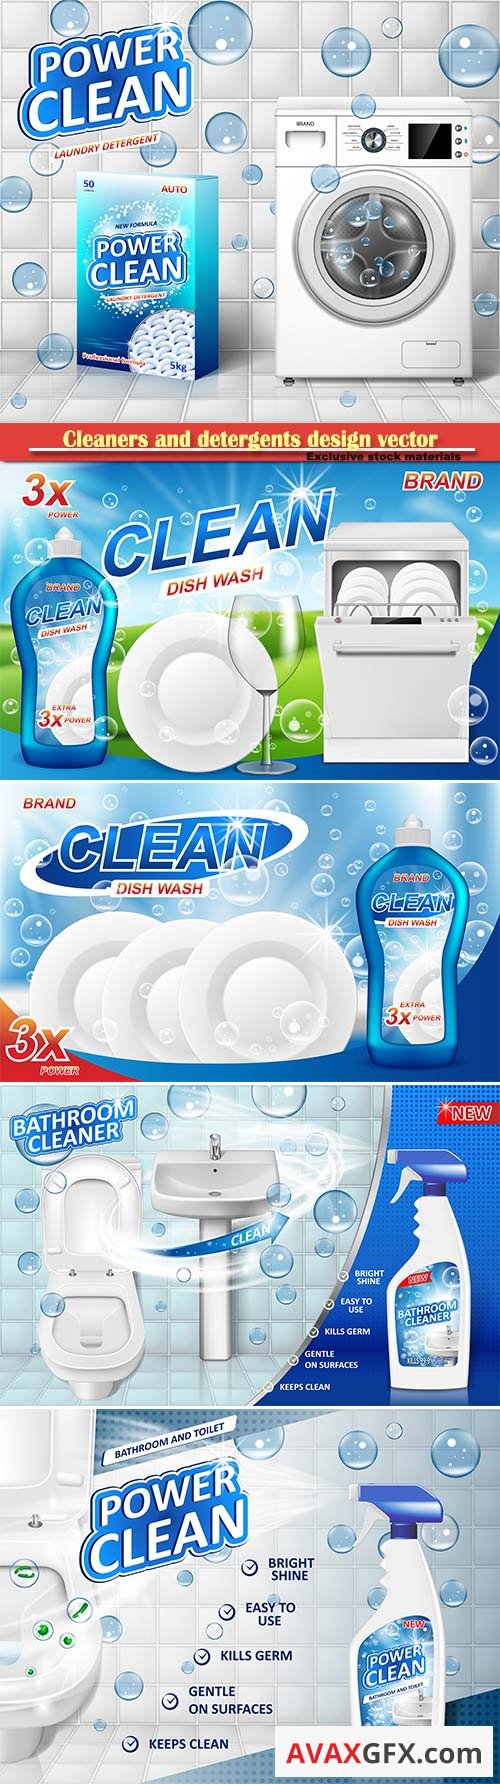 Cleaners and detergents design vector template